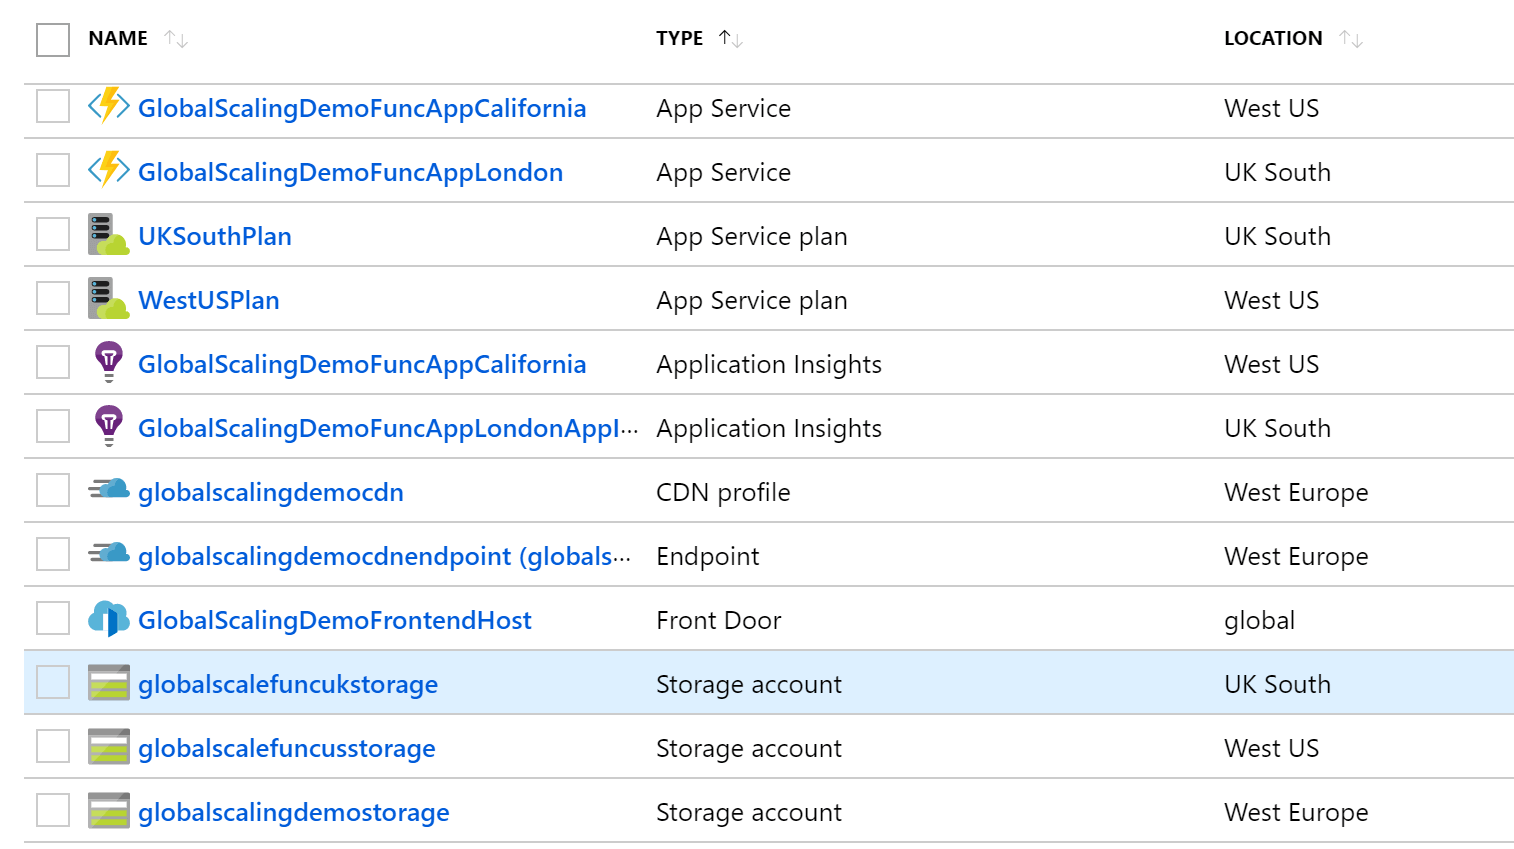 image showing how azure resource group with all required resources